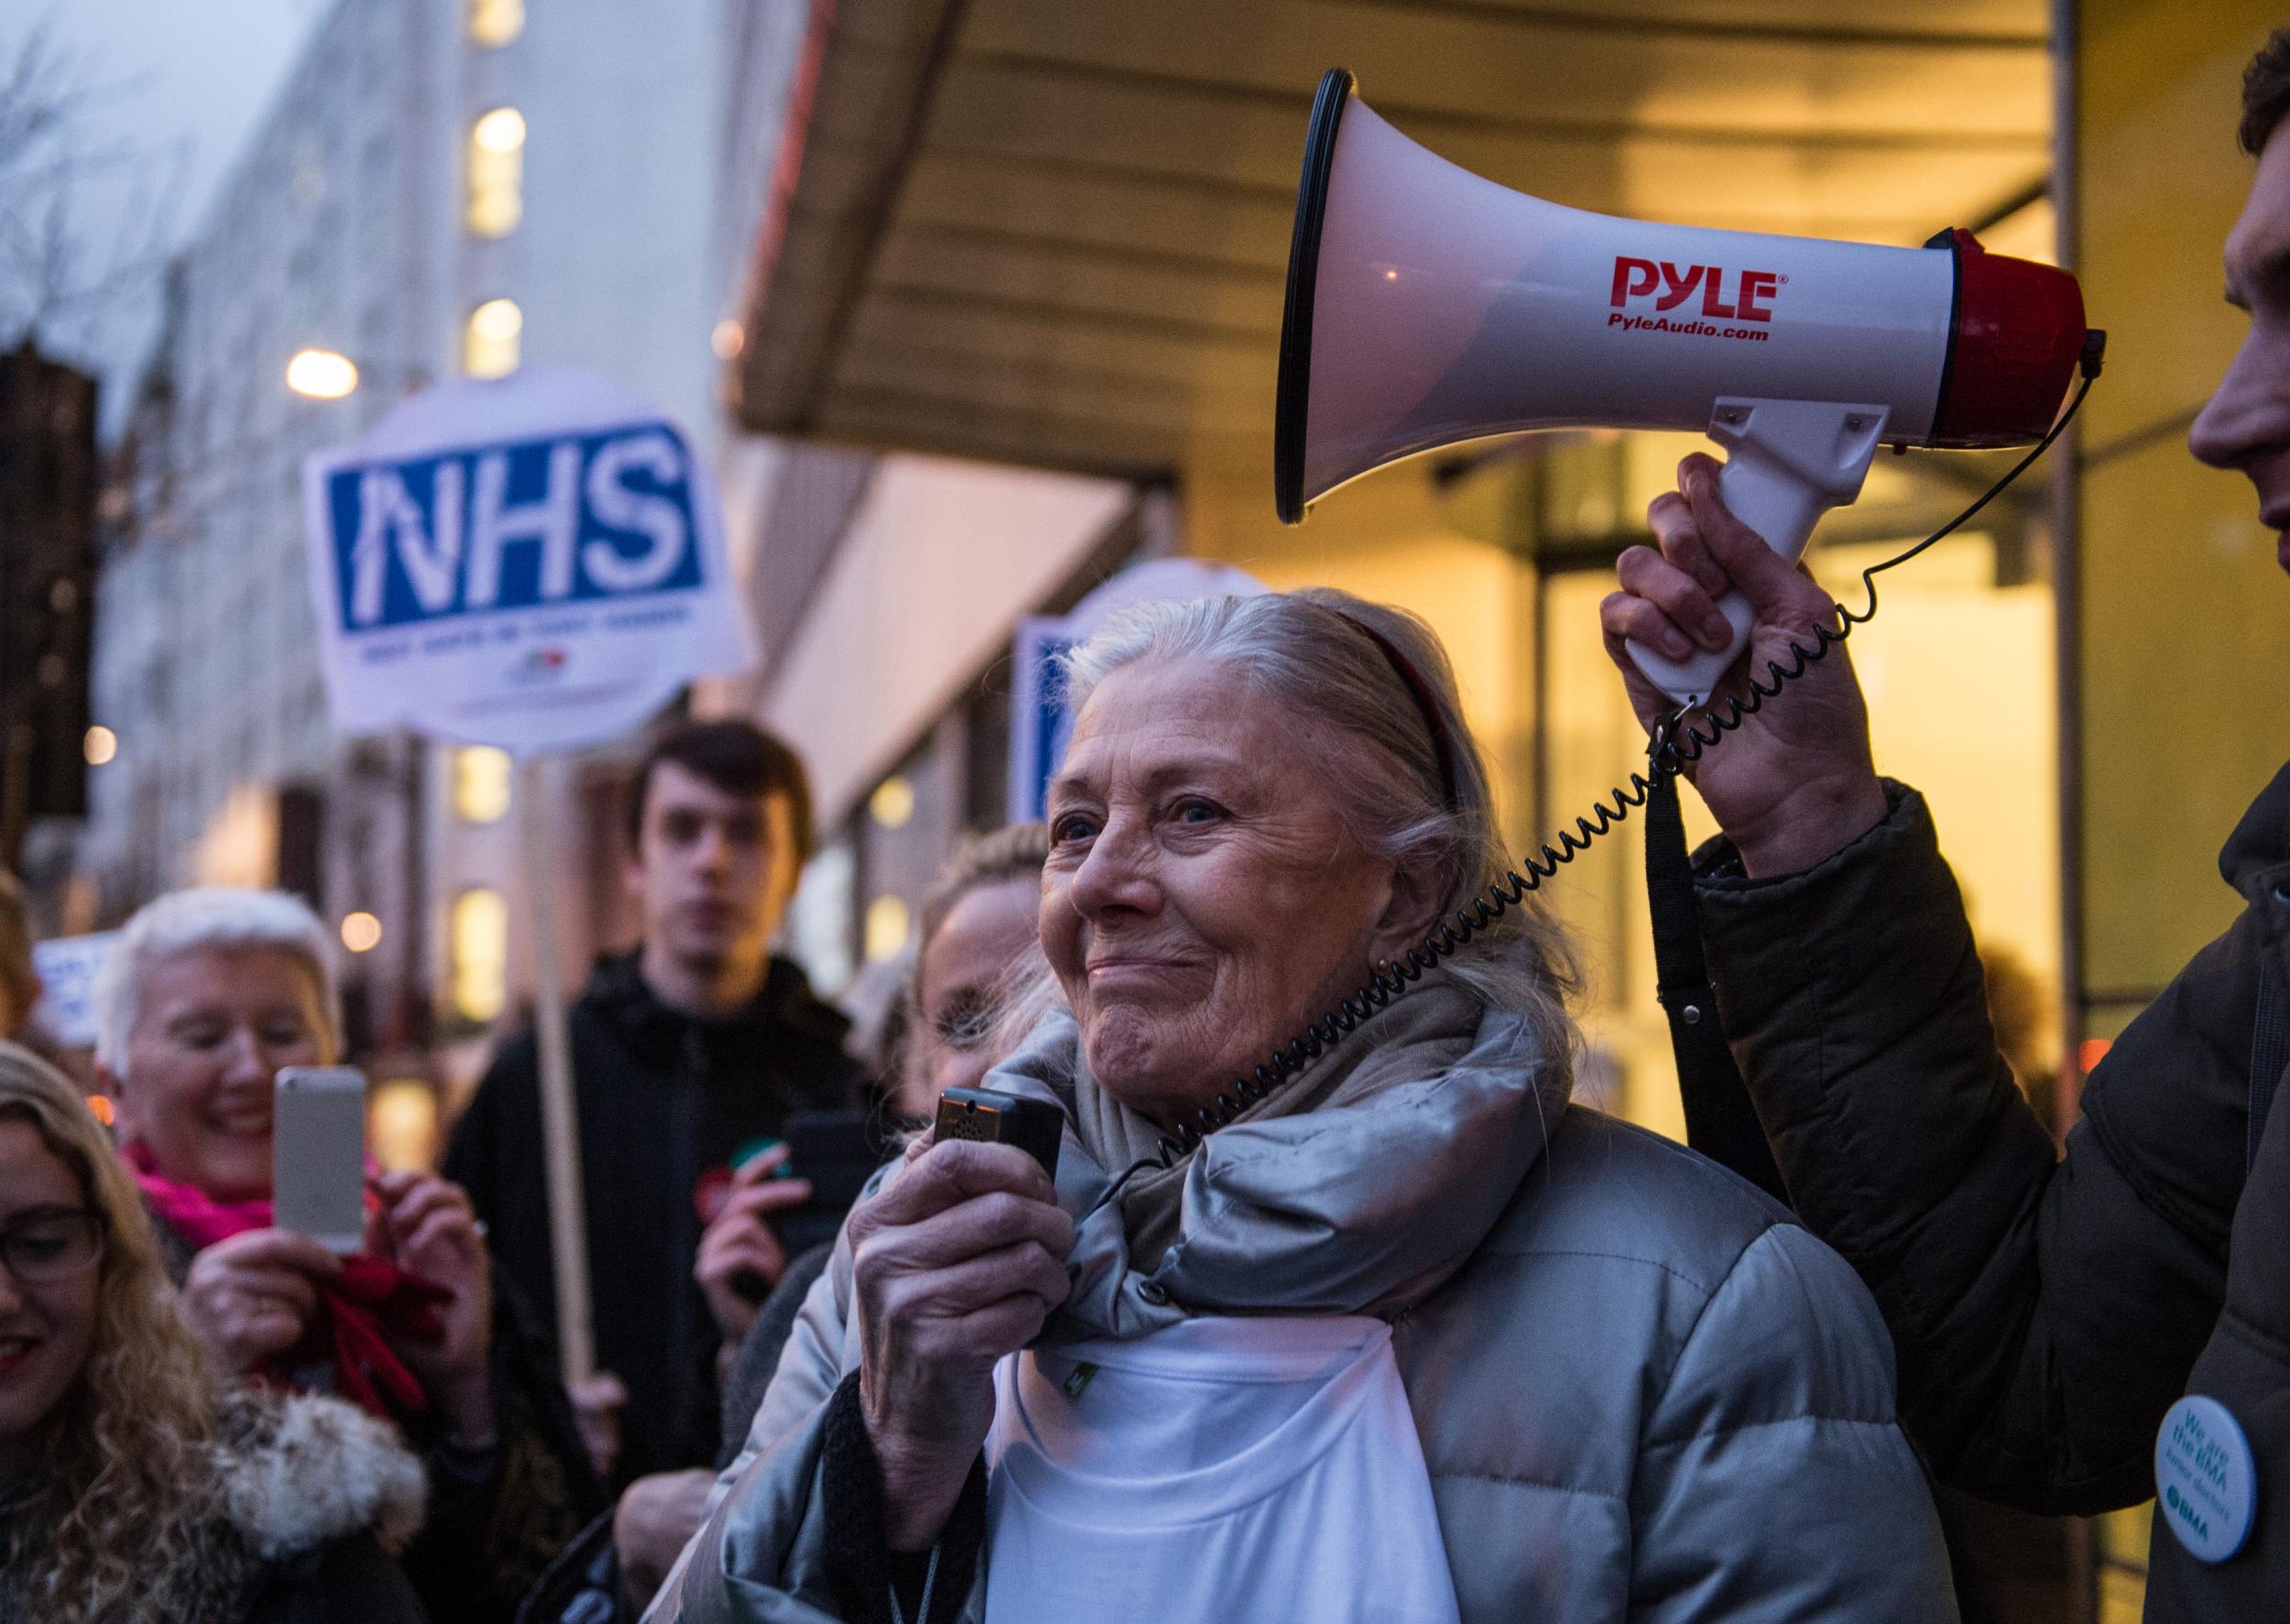 &#13;
Vanessa Redgrave joins junior doctors at their recent rally. Photo: Getty.&#13;